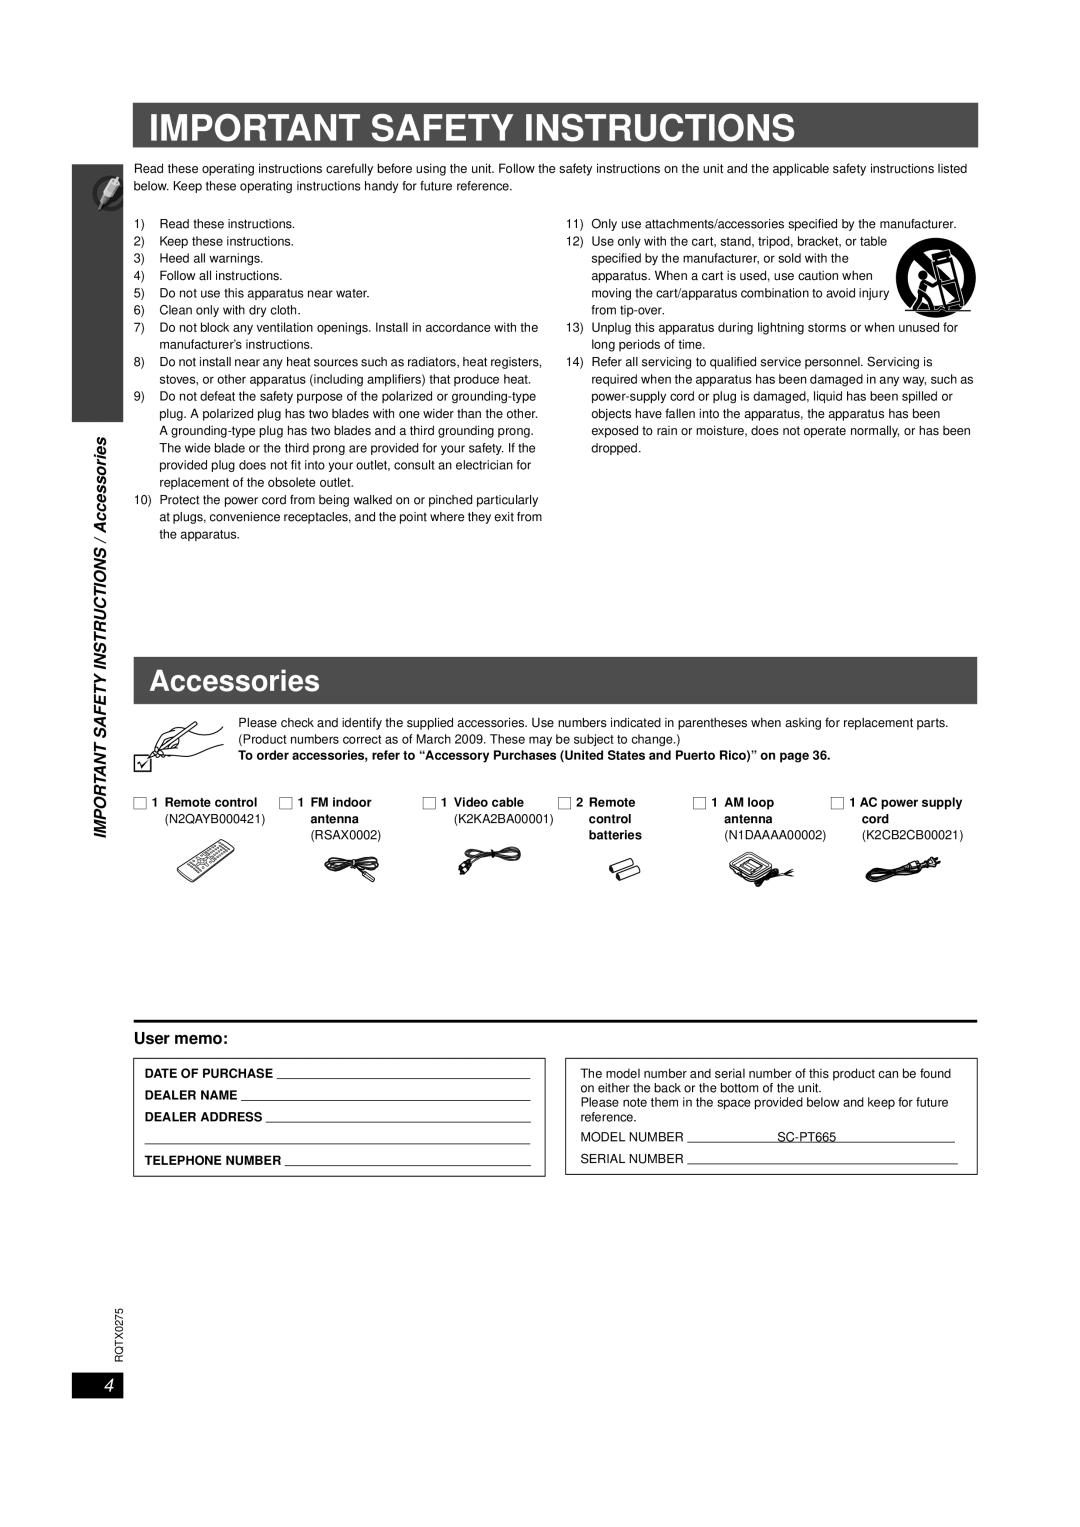 Panasonic SC-PT665 manual Important Safety Instructions, INSTRUCTIONS / Accessories, User memo 